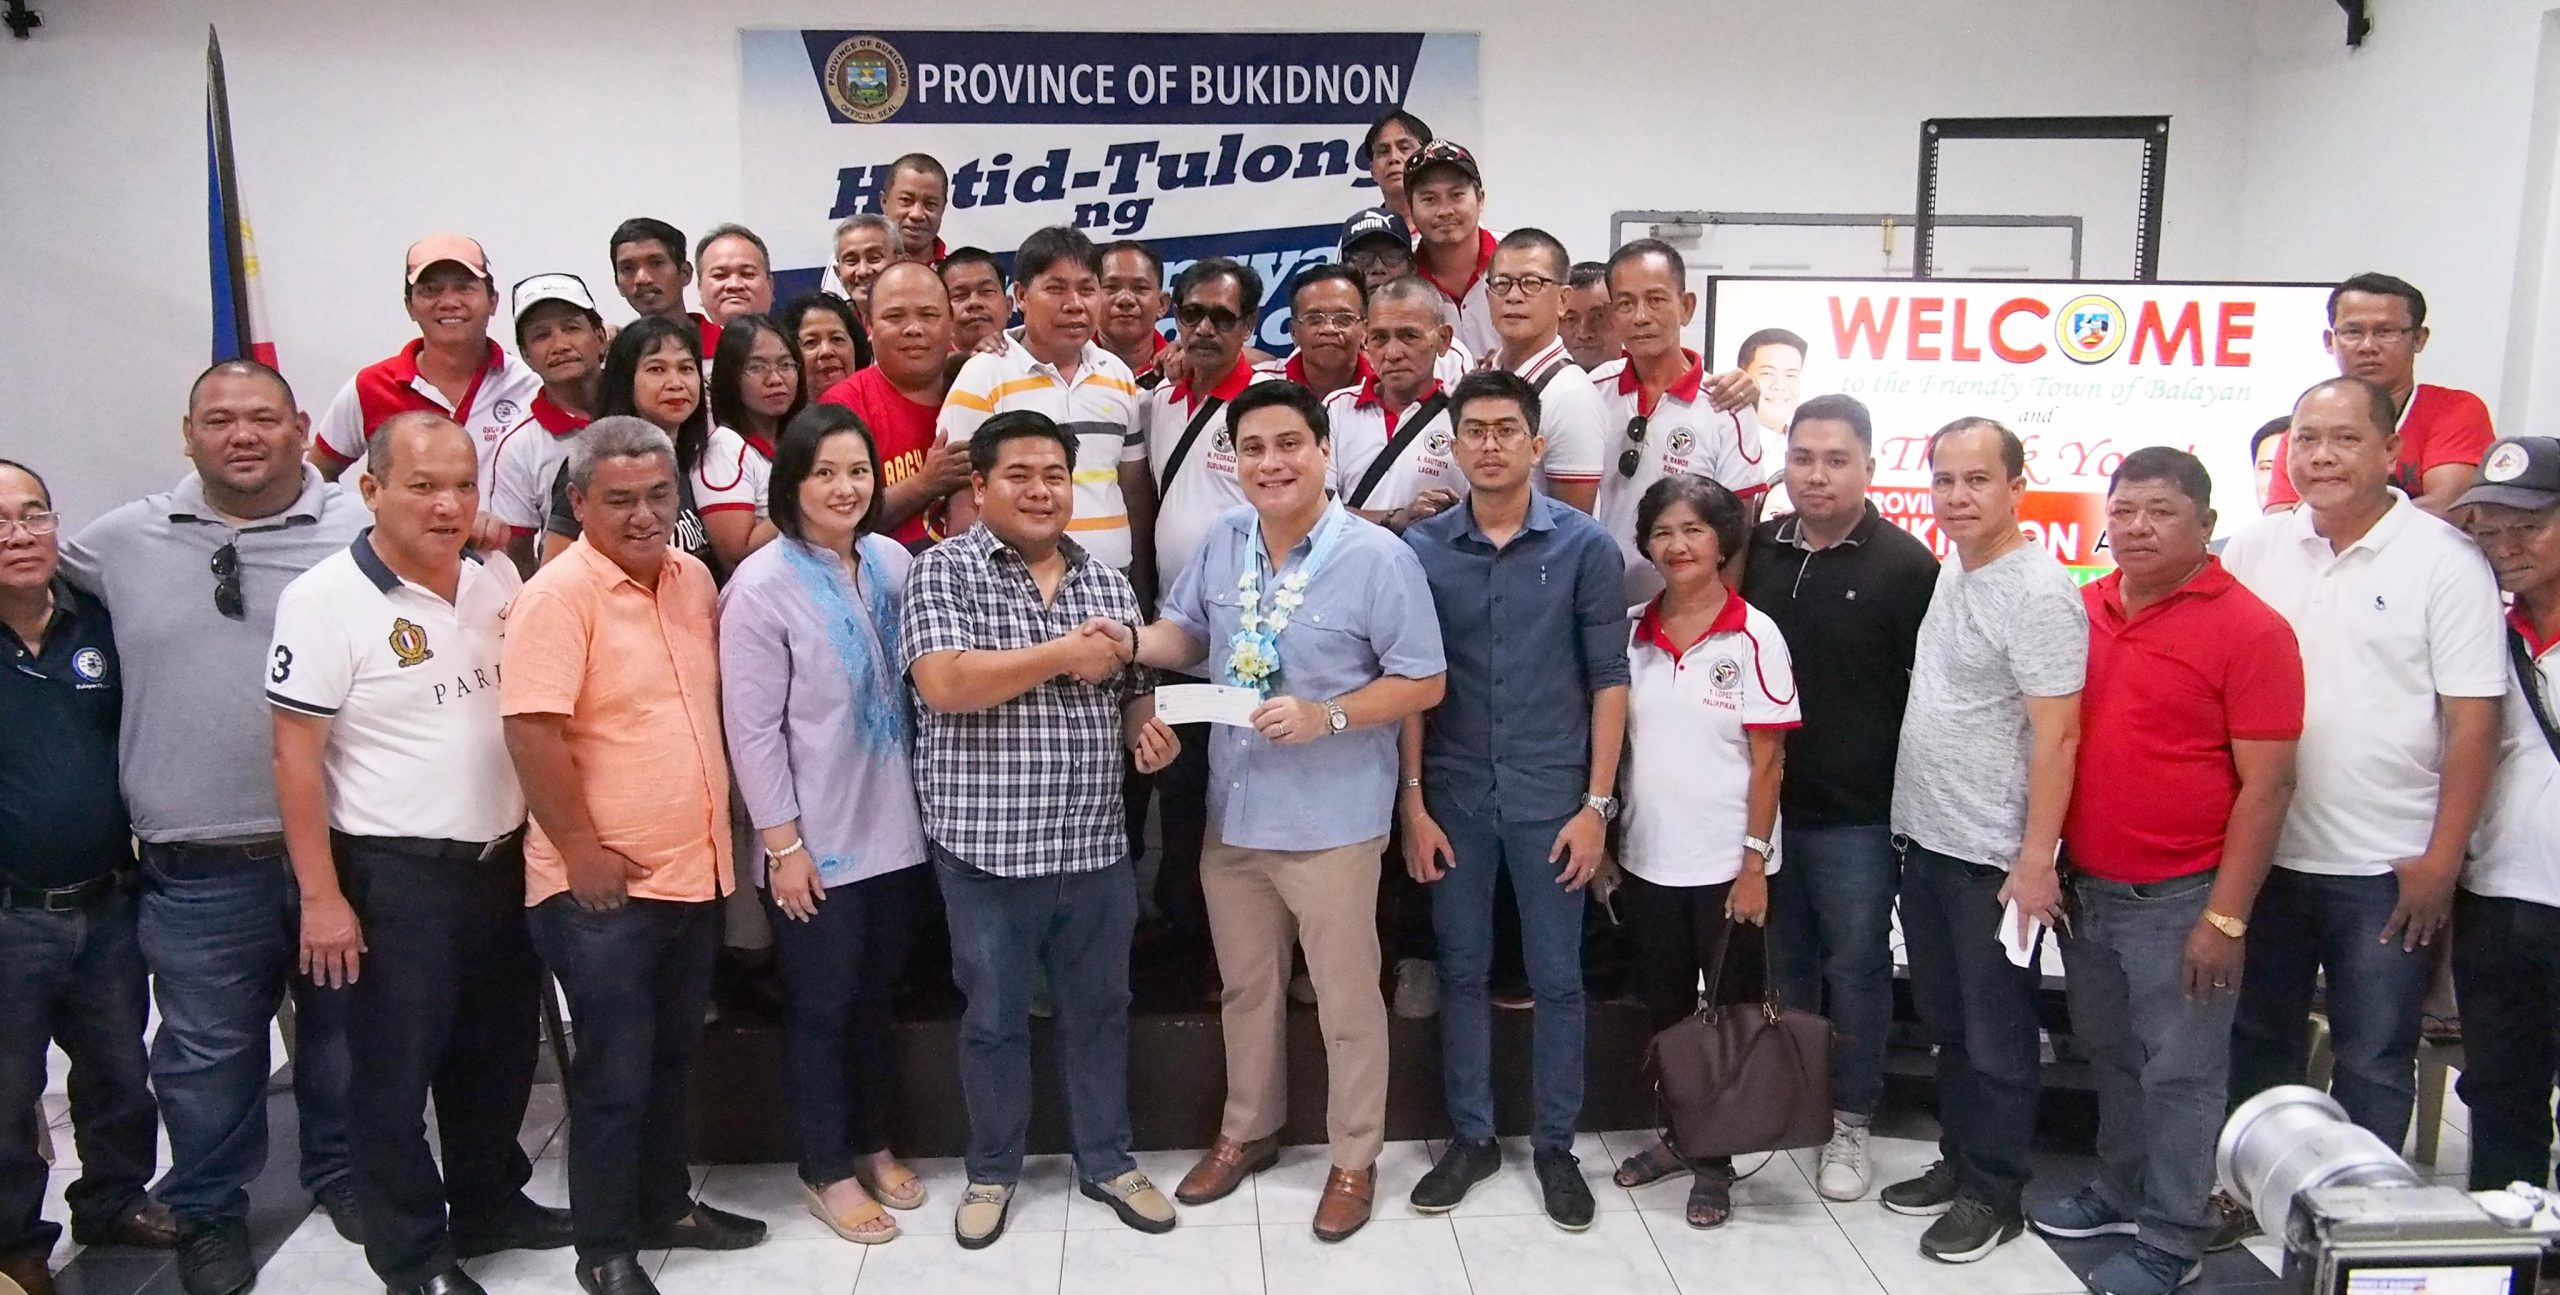 In Photos: Migs Zubiri delivers Php 6M donation from Bukidnon to Taal survivors